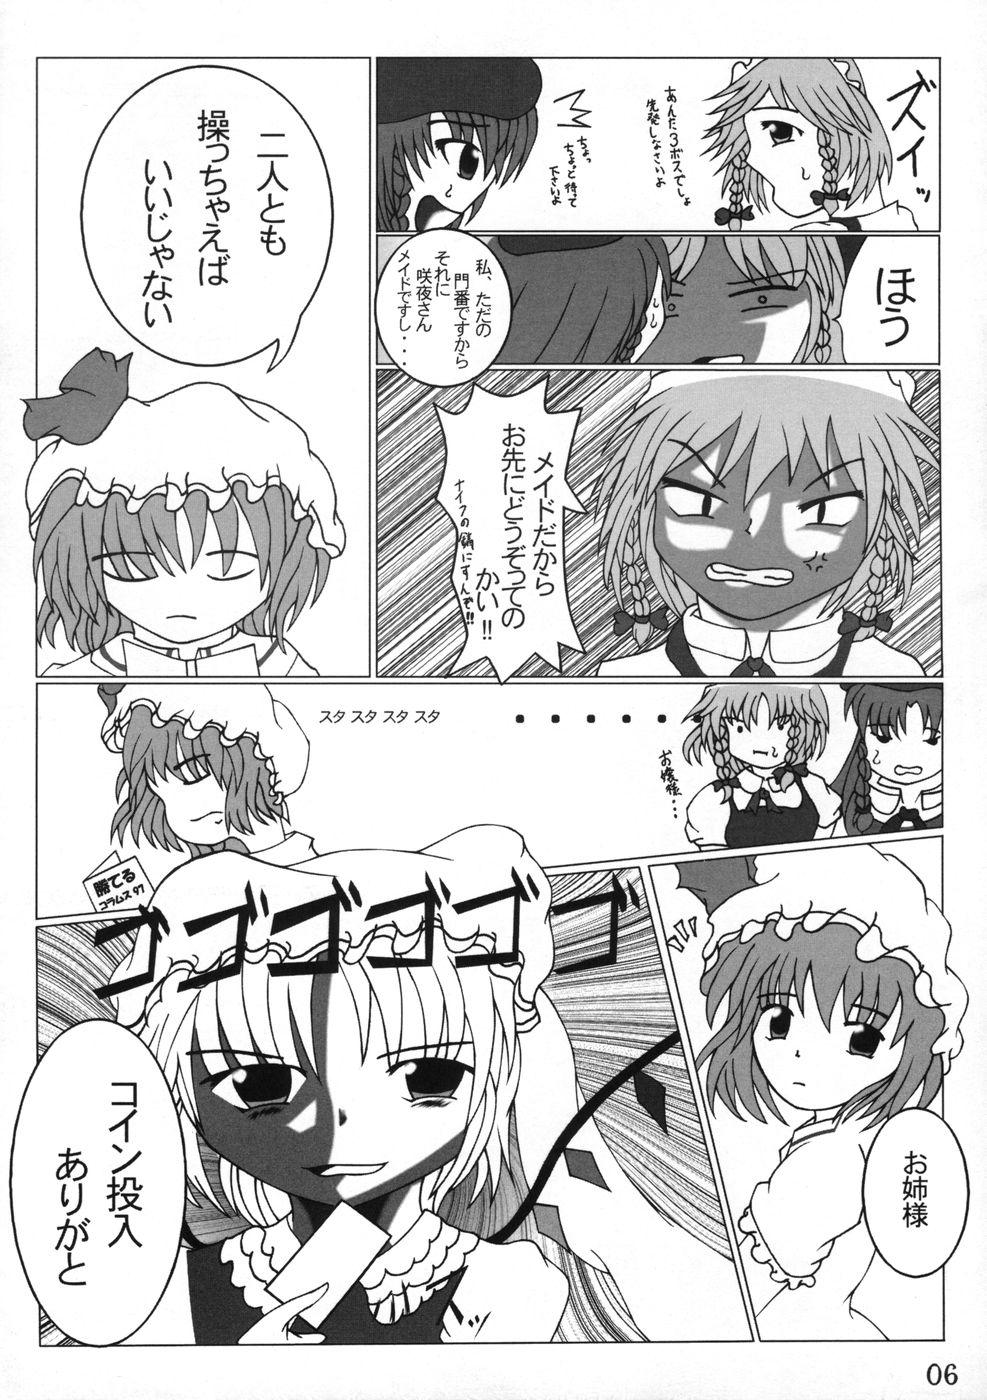 Porn Pussy 業創りし風 - Touhou project Hot Naked Girl - Page 6